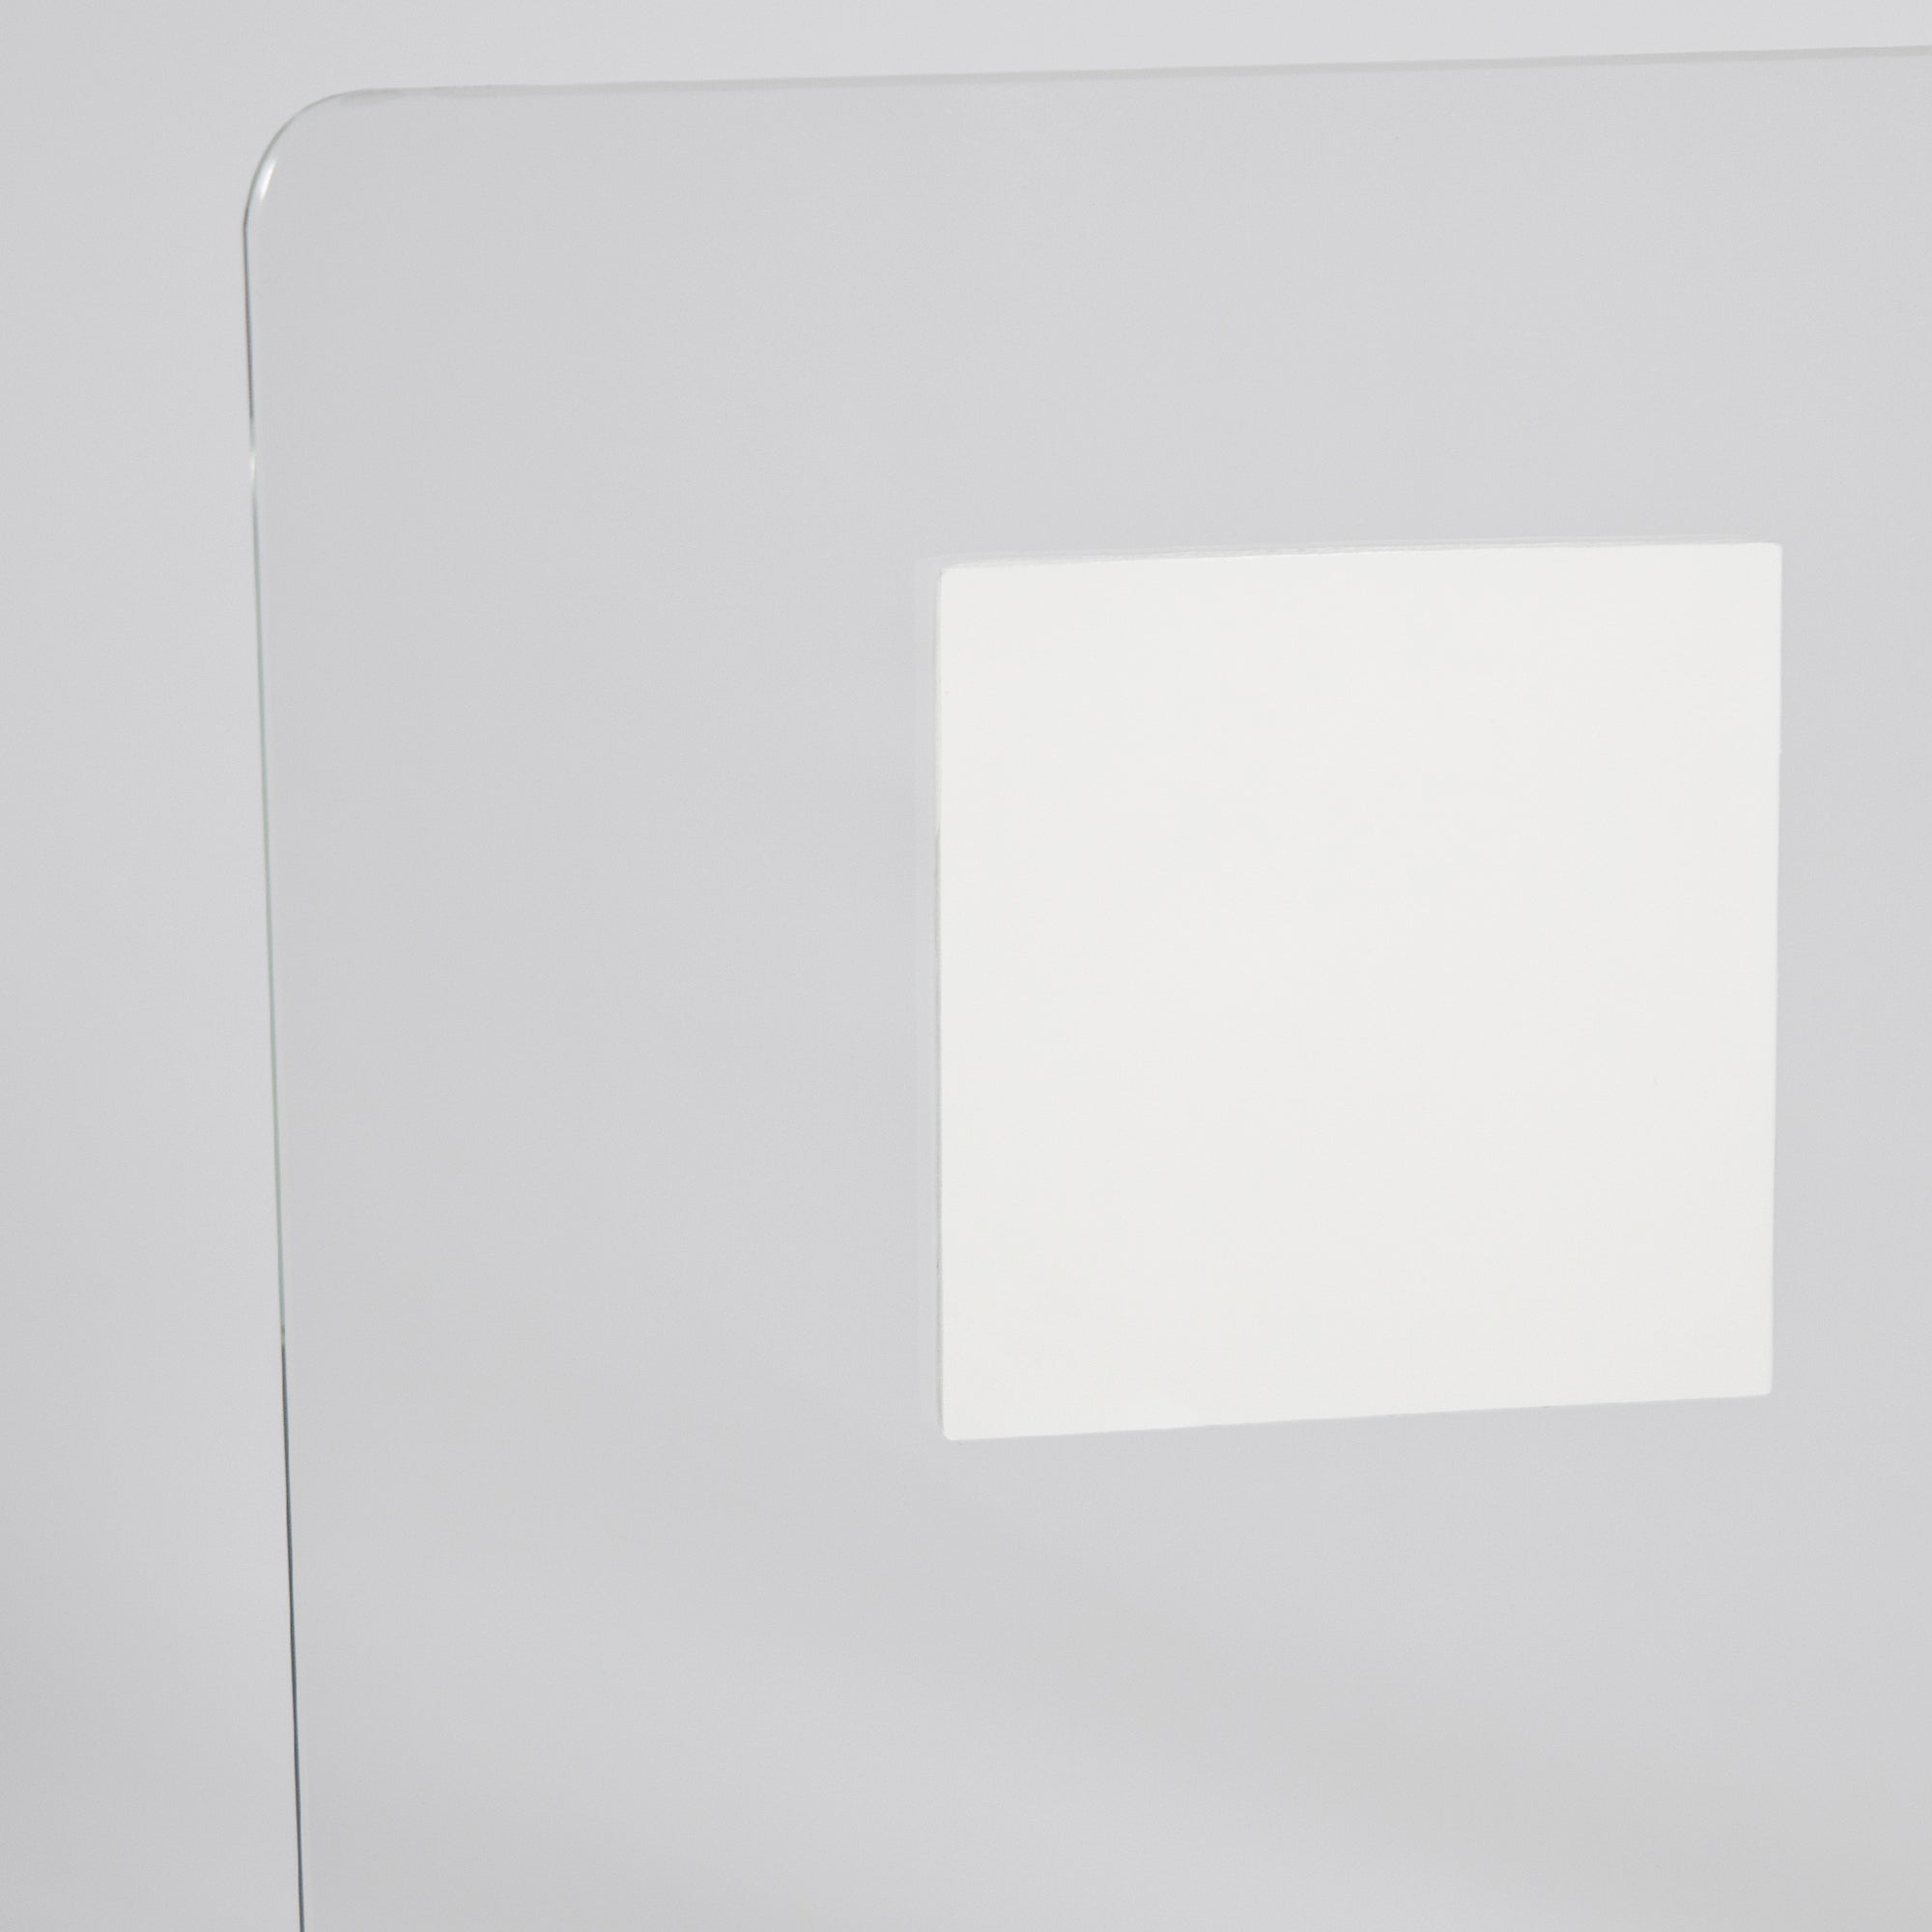 Reusable Dry-Erase Sticky Pads for any non-textured surface.